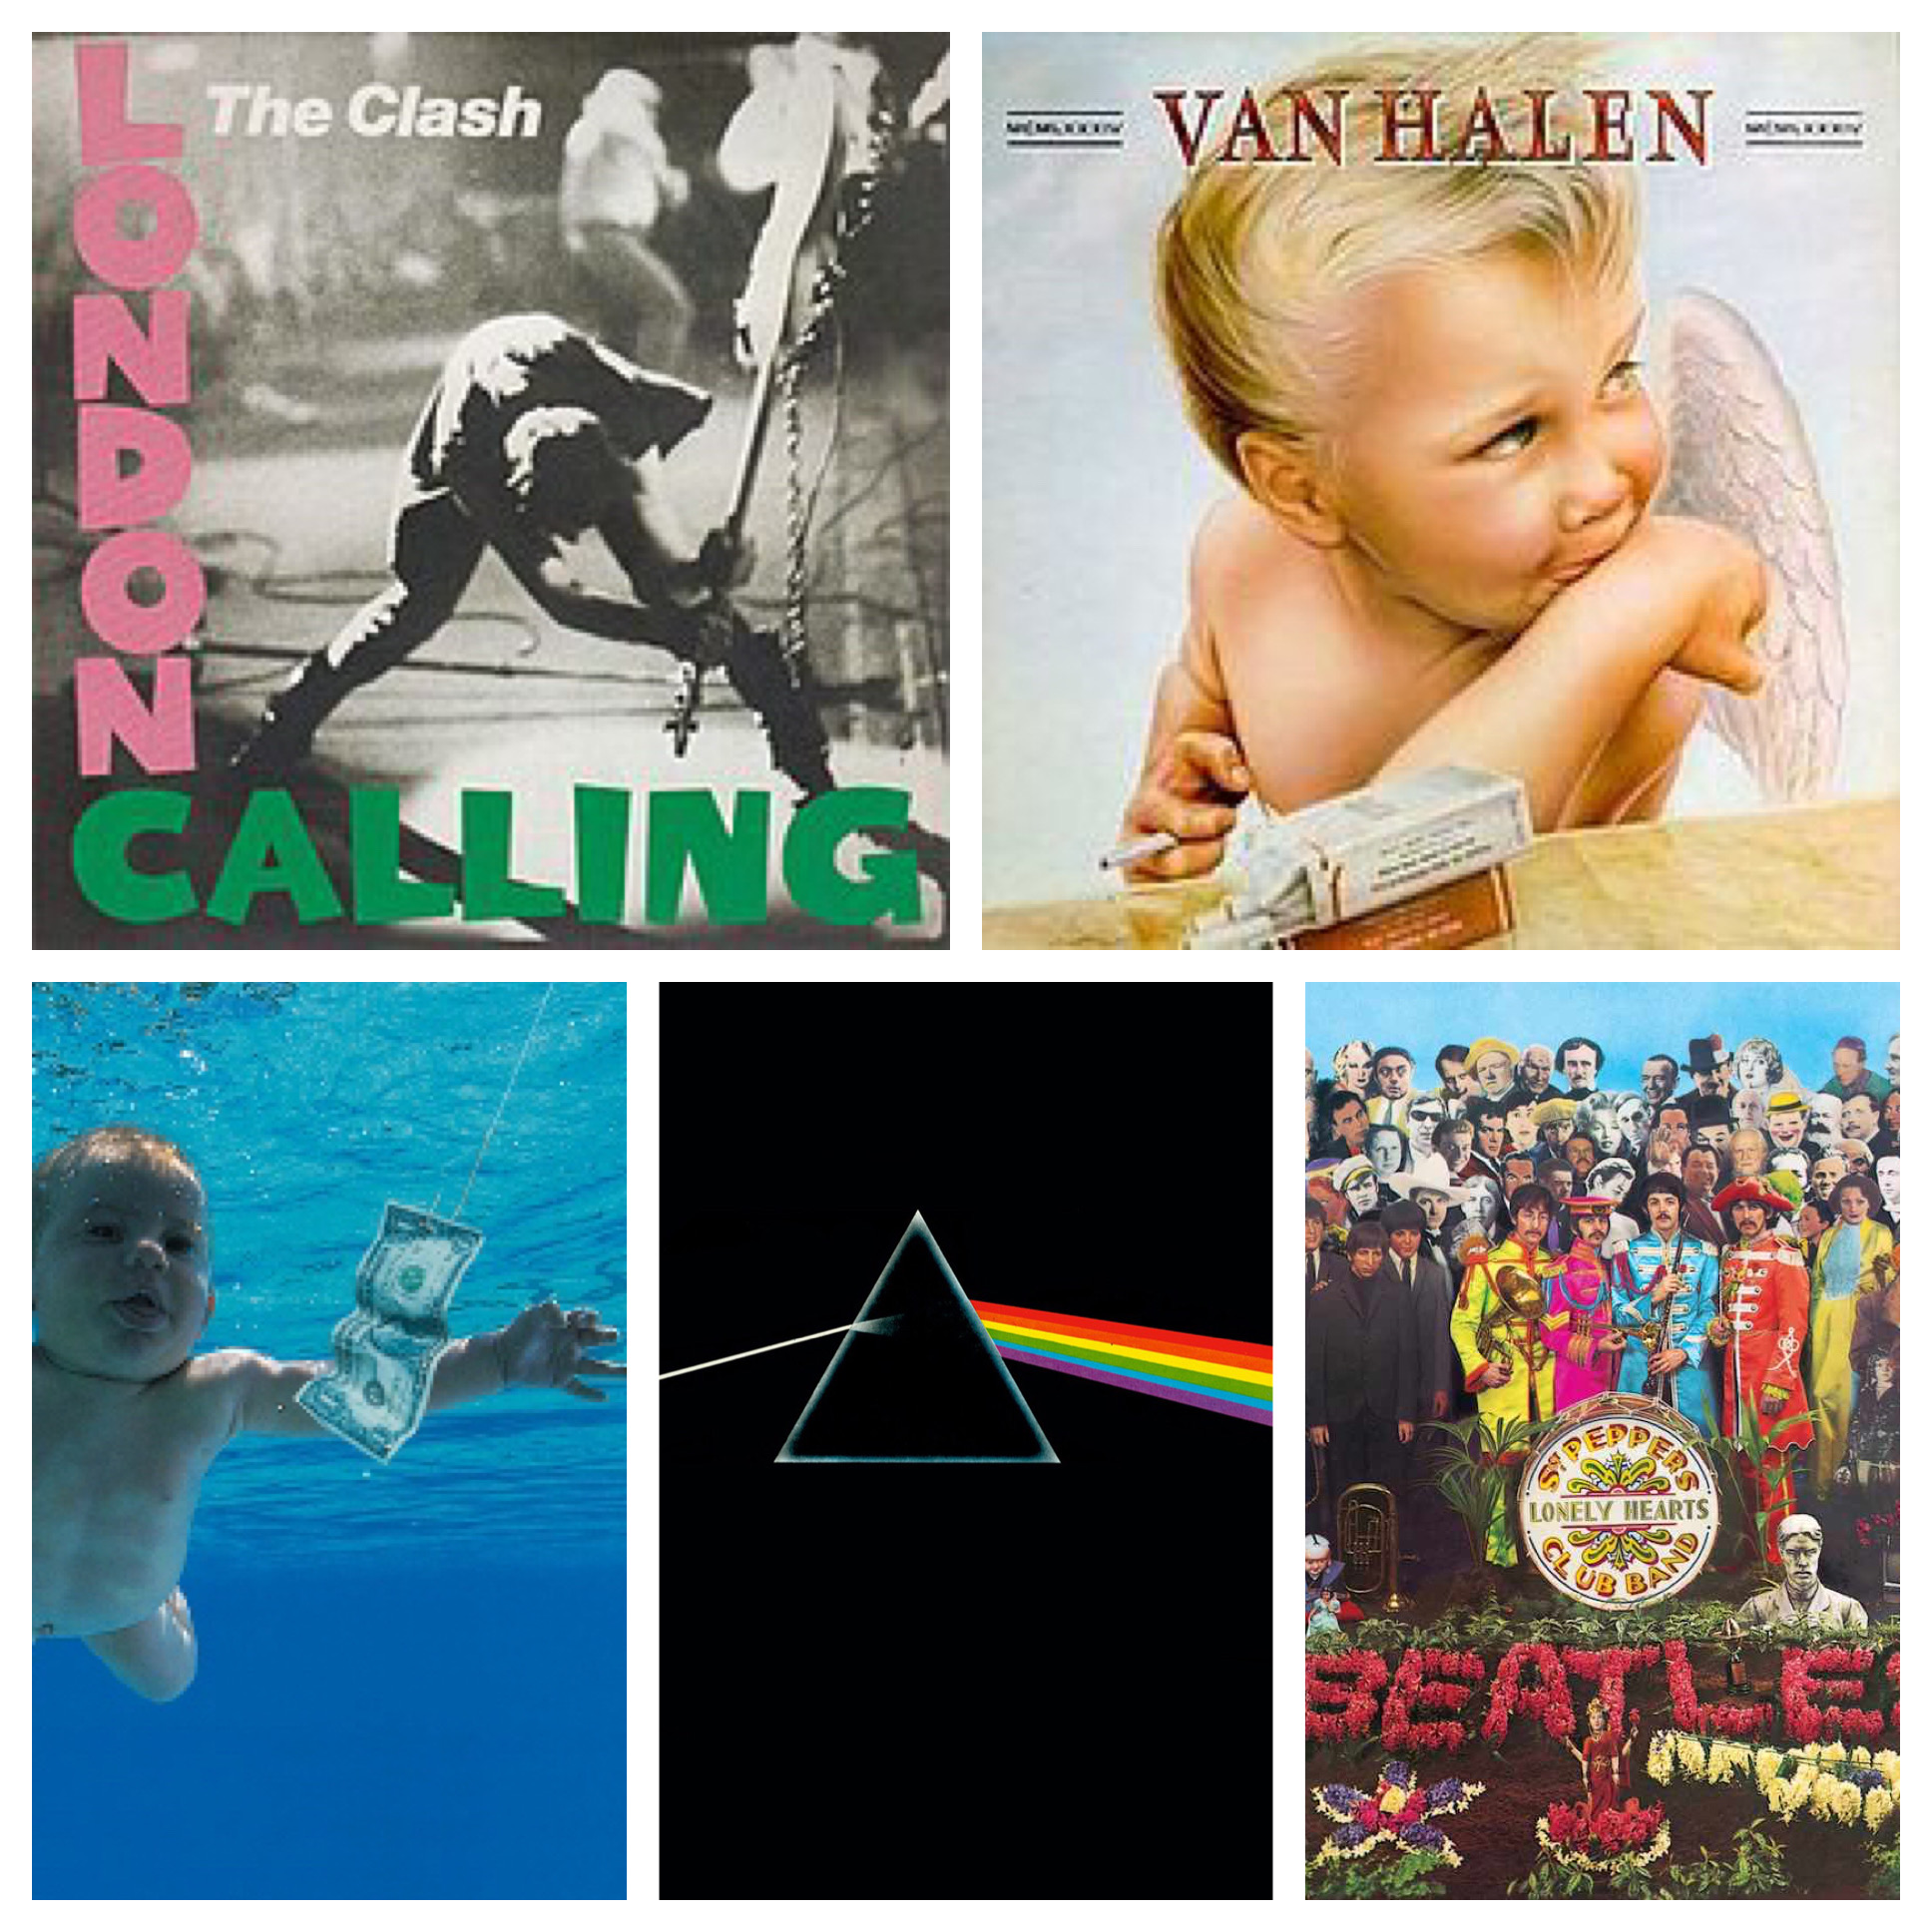 shuffle Daddy Sikker SiriusXM VOLUME on Twitter: "You voted! Here are the Top 5 Album Covers!  #Debatable https://t.co/IZdlgseF0e" / Twitter